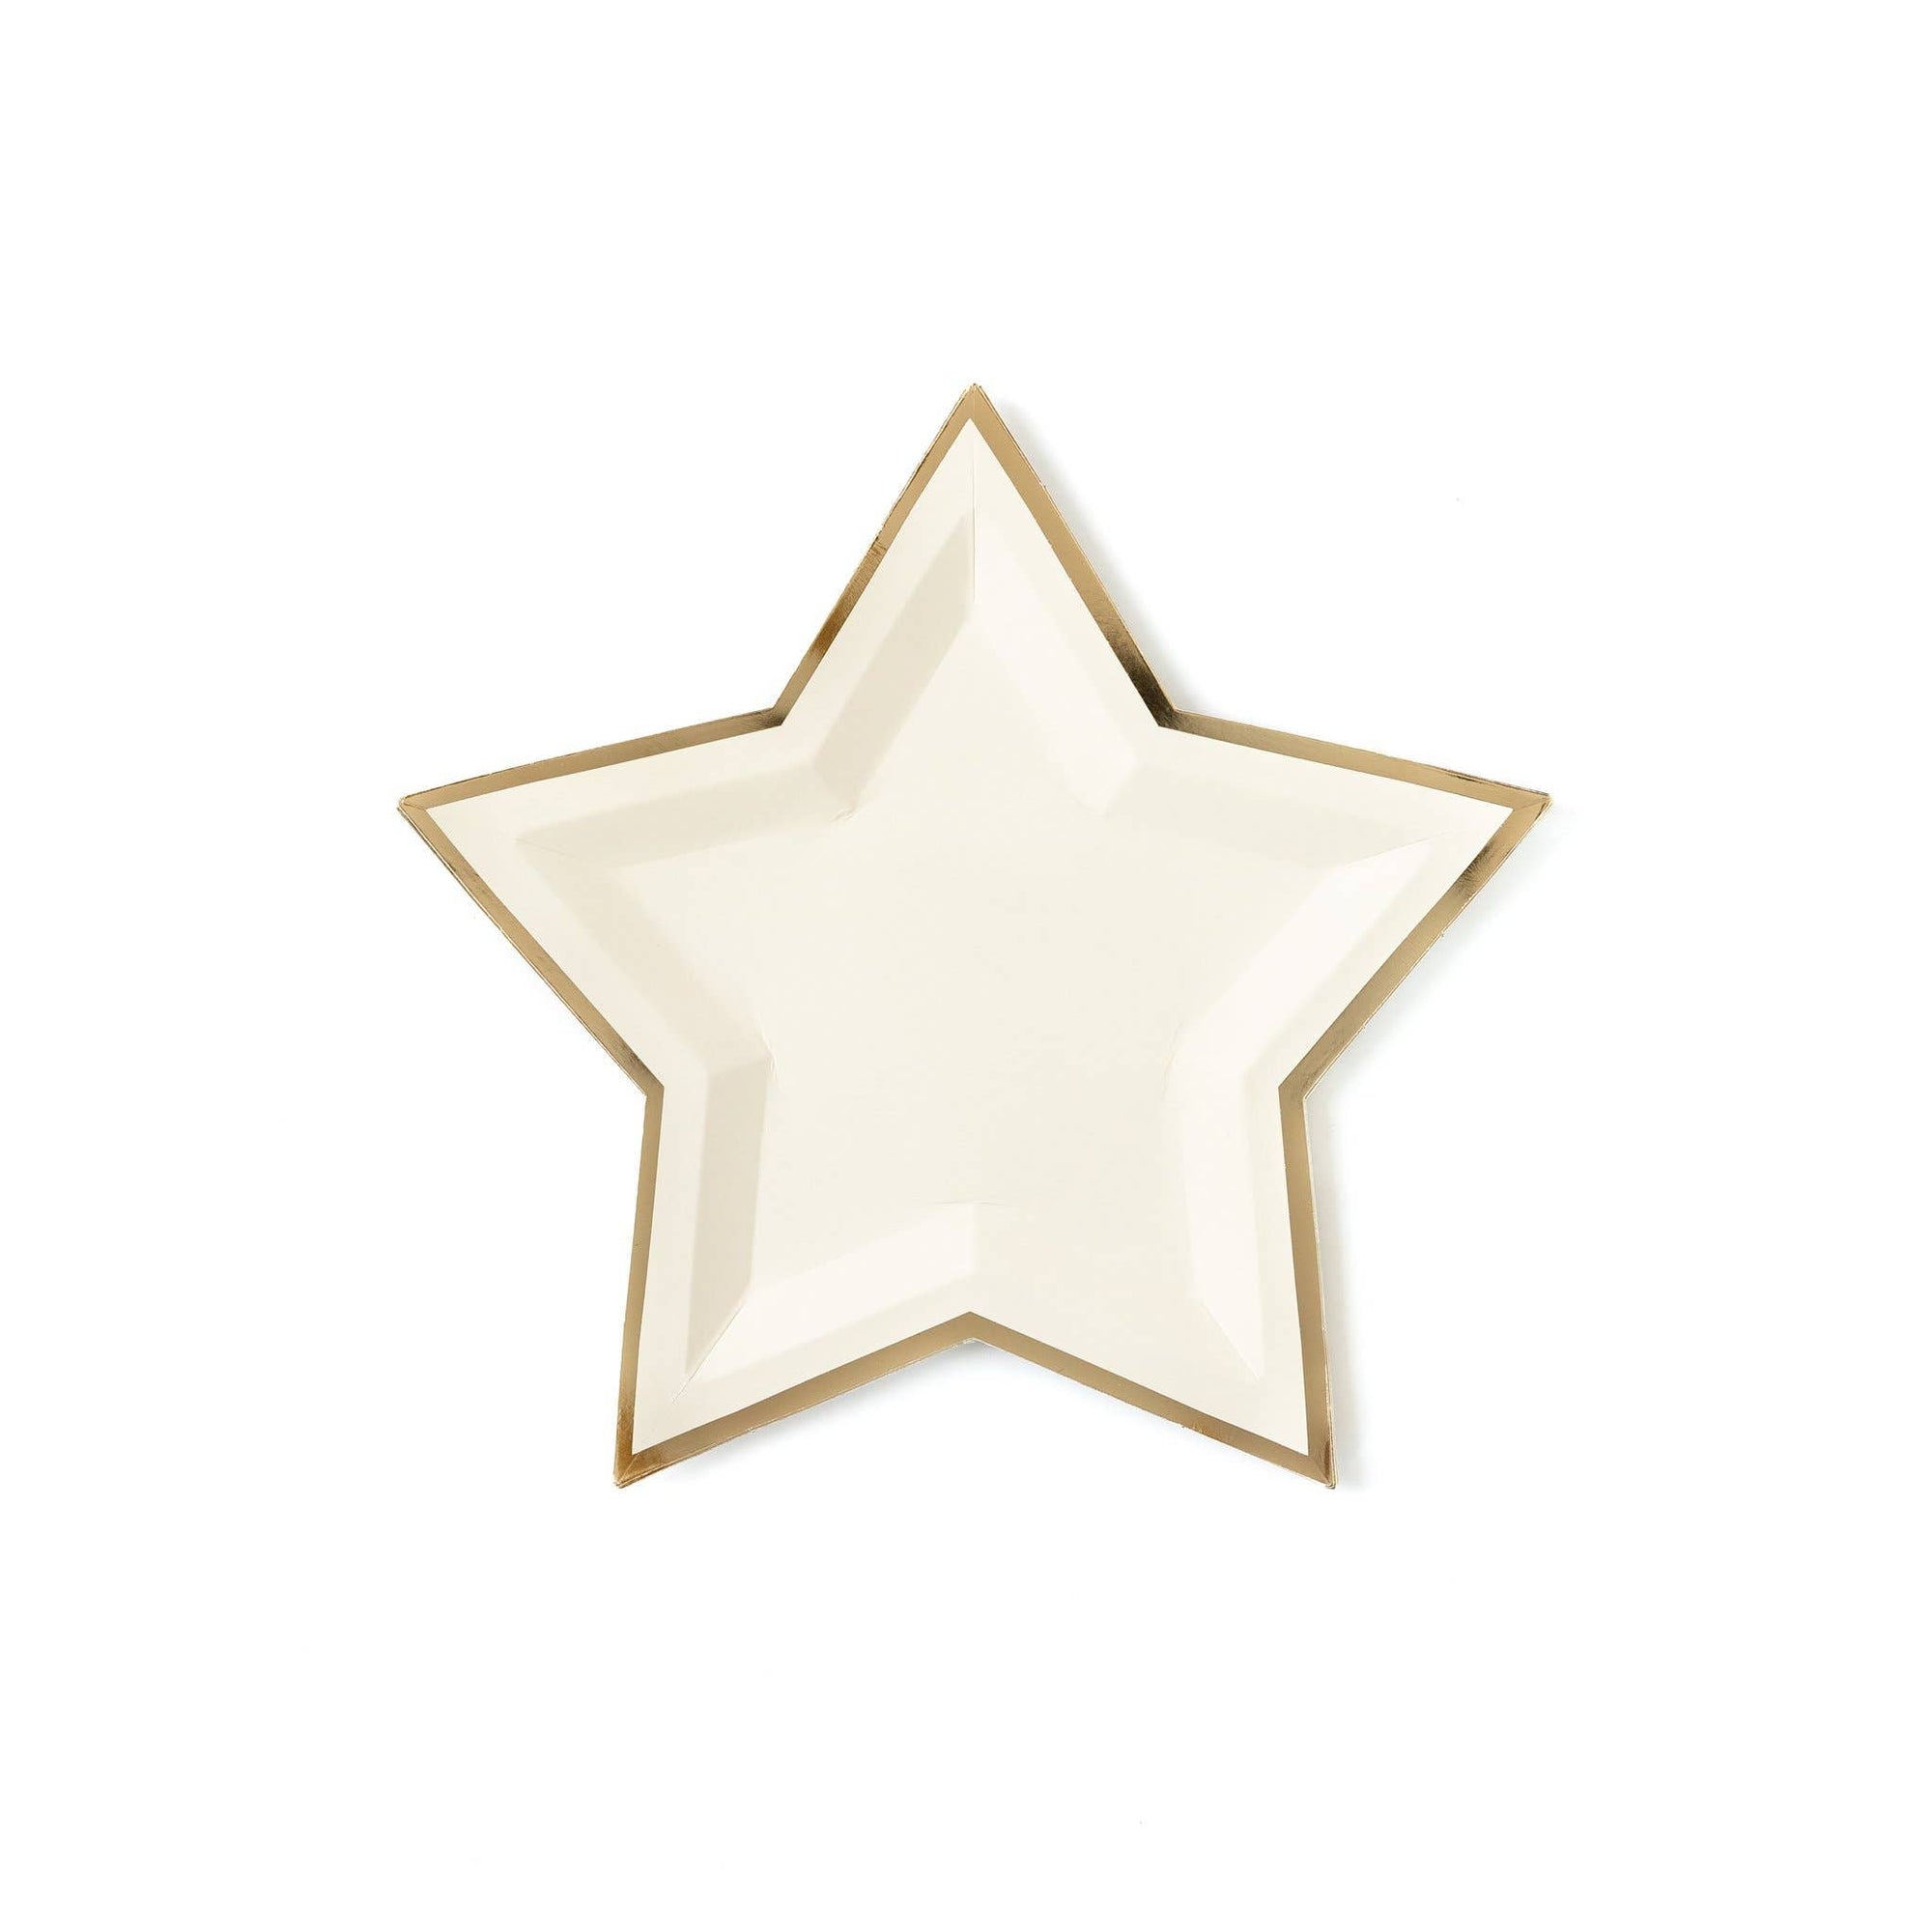 Cream Star Shaped 9" Gold Foiled Plates - The Preppy Bunny